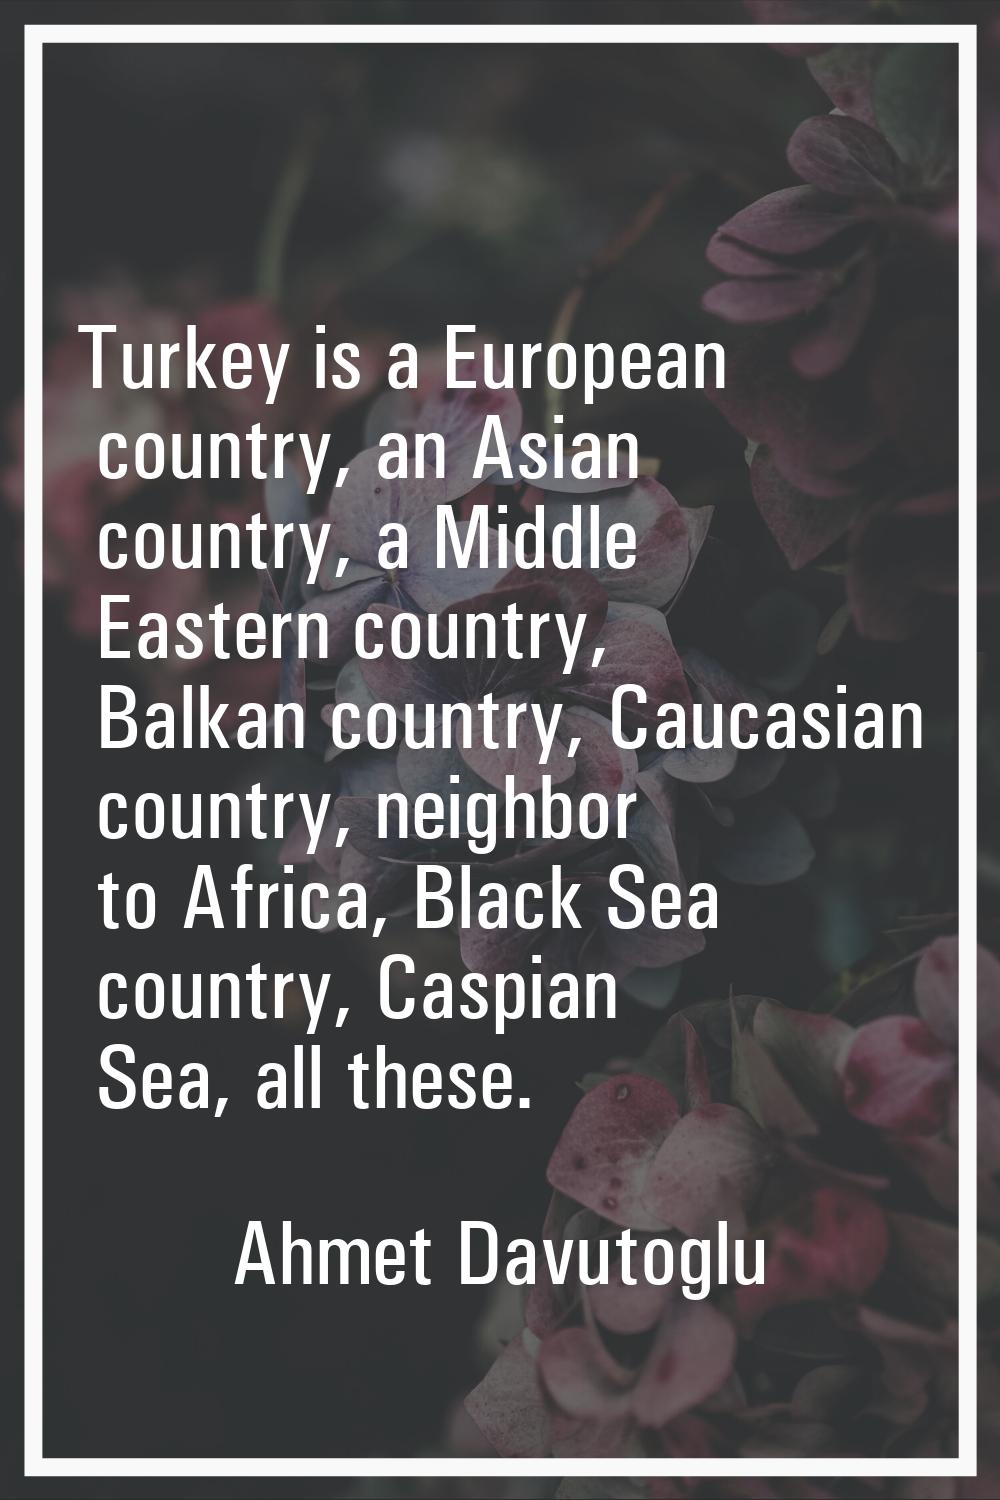 Turkey is a European country, an Asian country, a Middle Eastern country, Balkan country, Caucasian